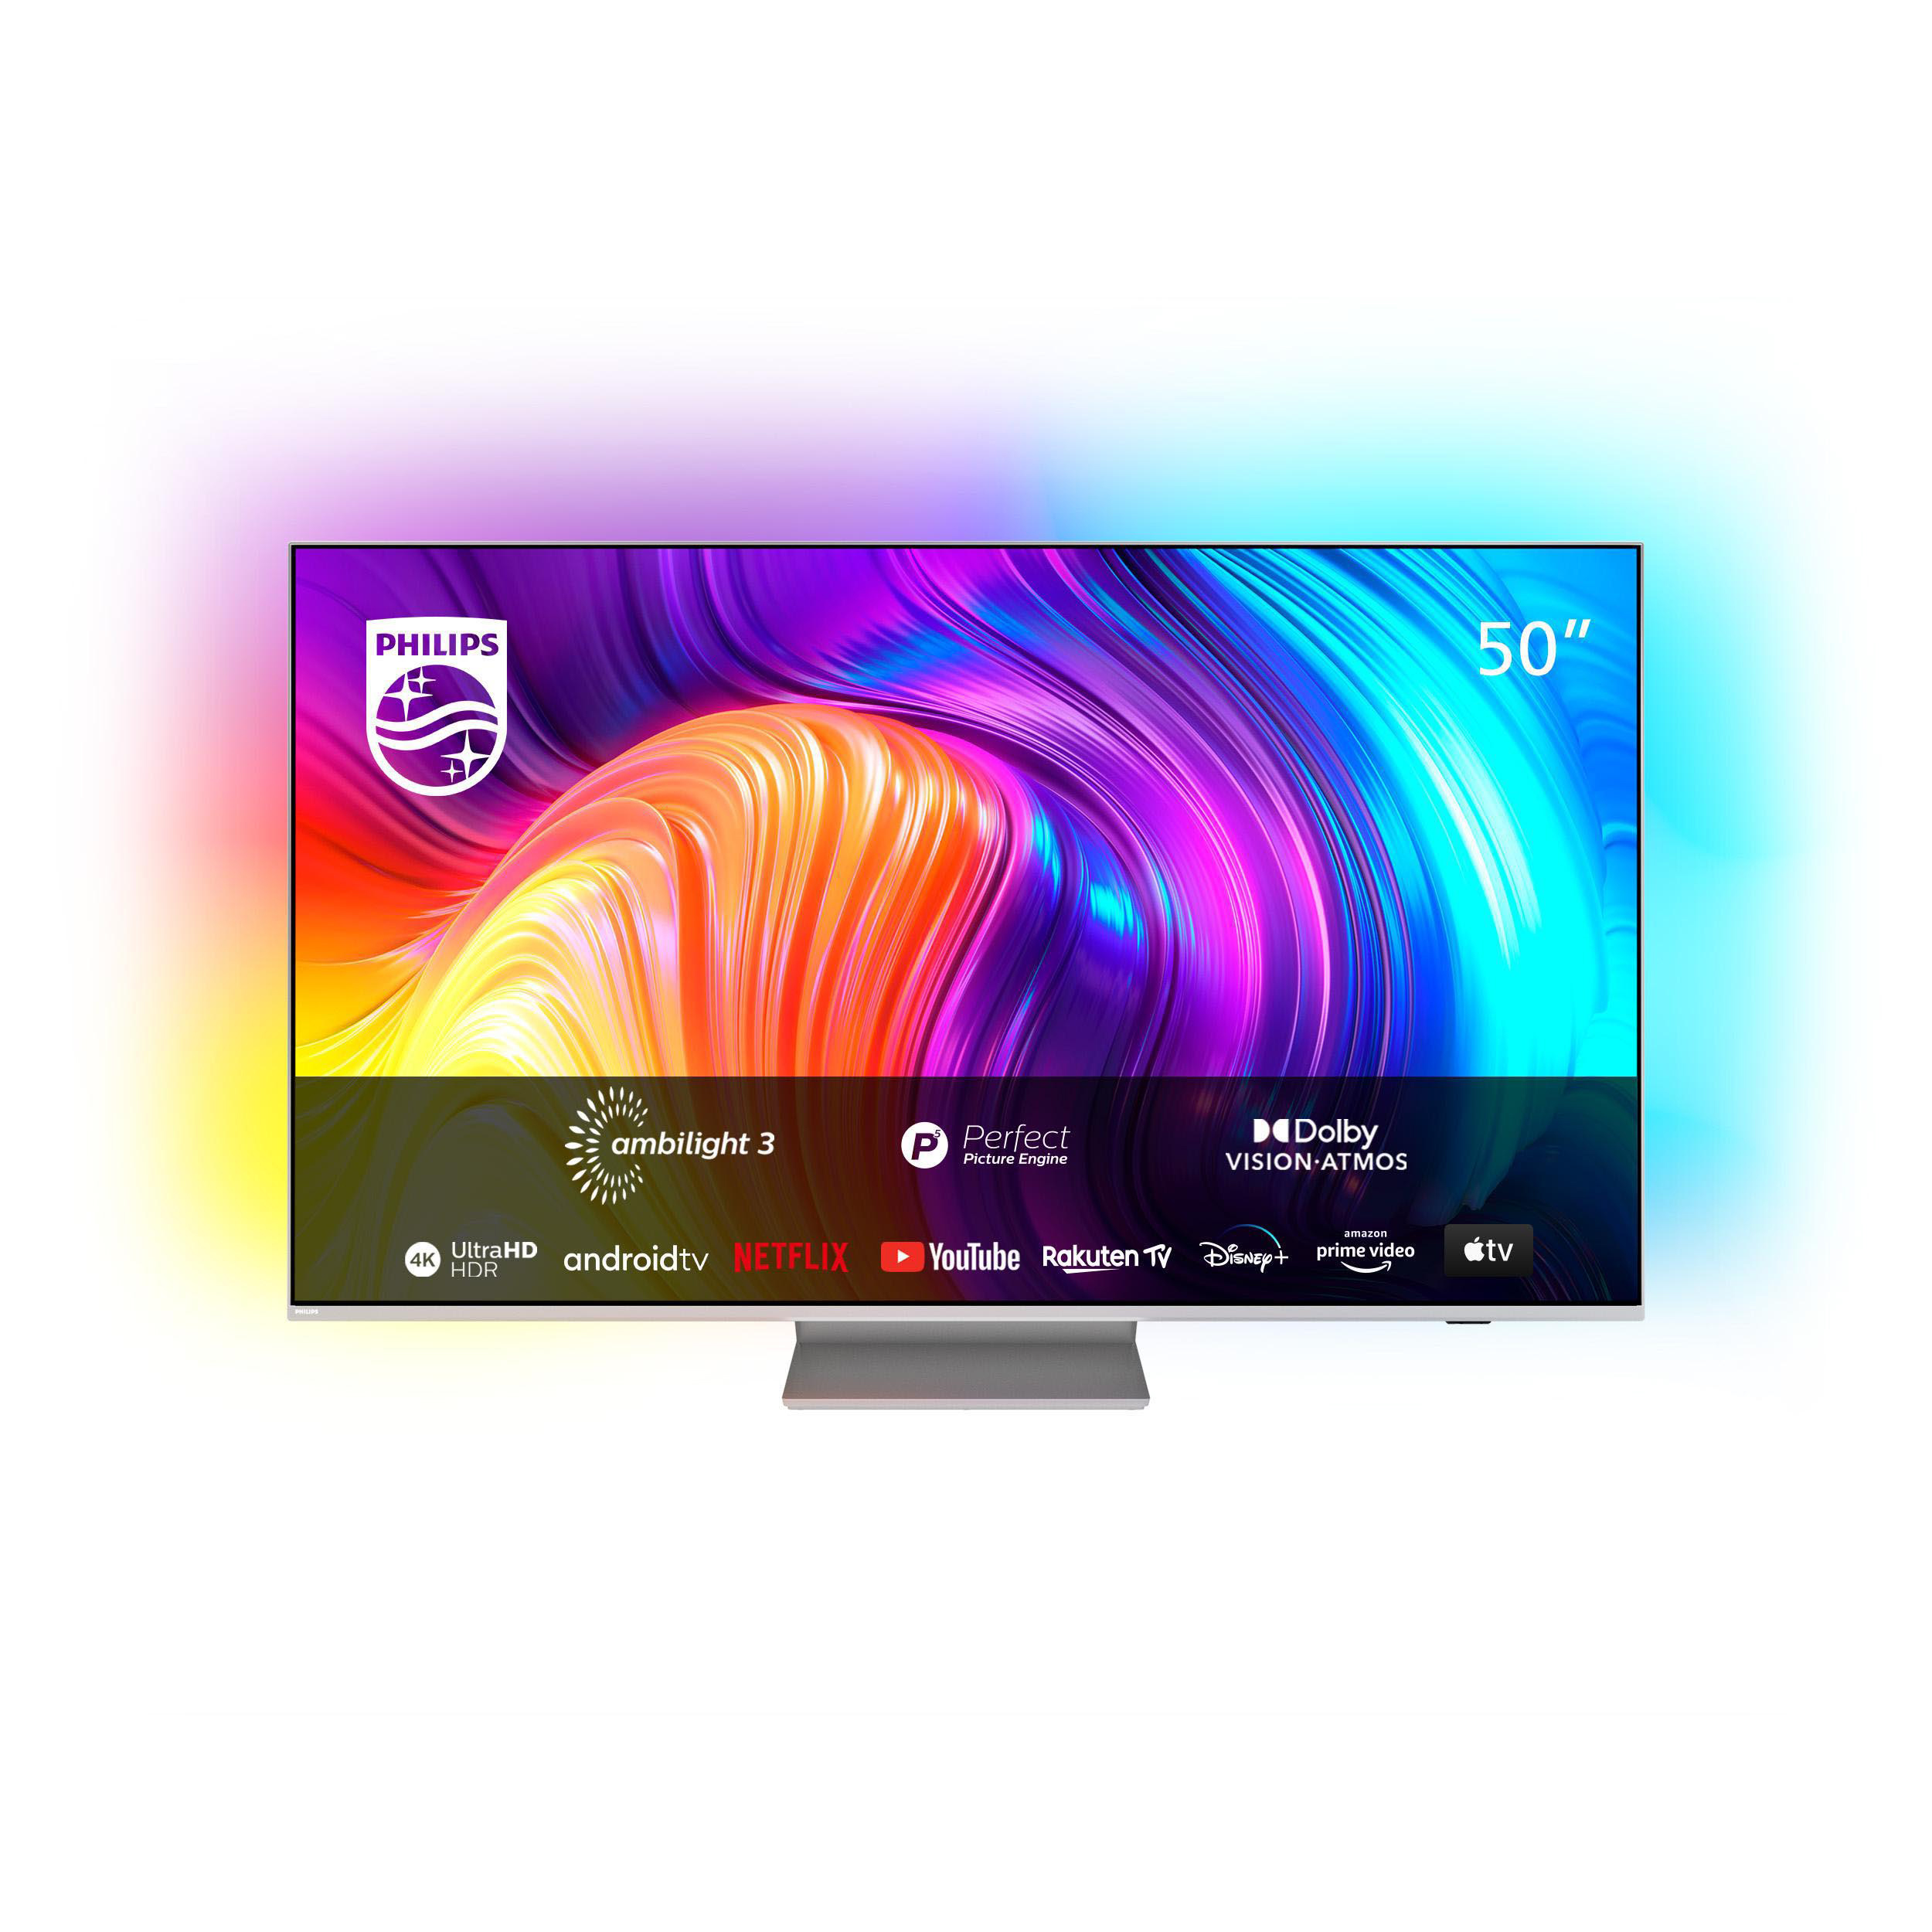 PHILIPS 50PUS8837/12 (50 Zoll) The TV™ 11 UHD Ambilight, 4K 4K, (R)) One Android TV cm, (Flat, UHD Zoll 126 SMART / TV, 50 LED